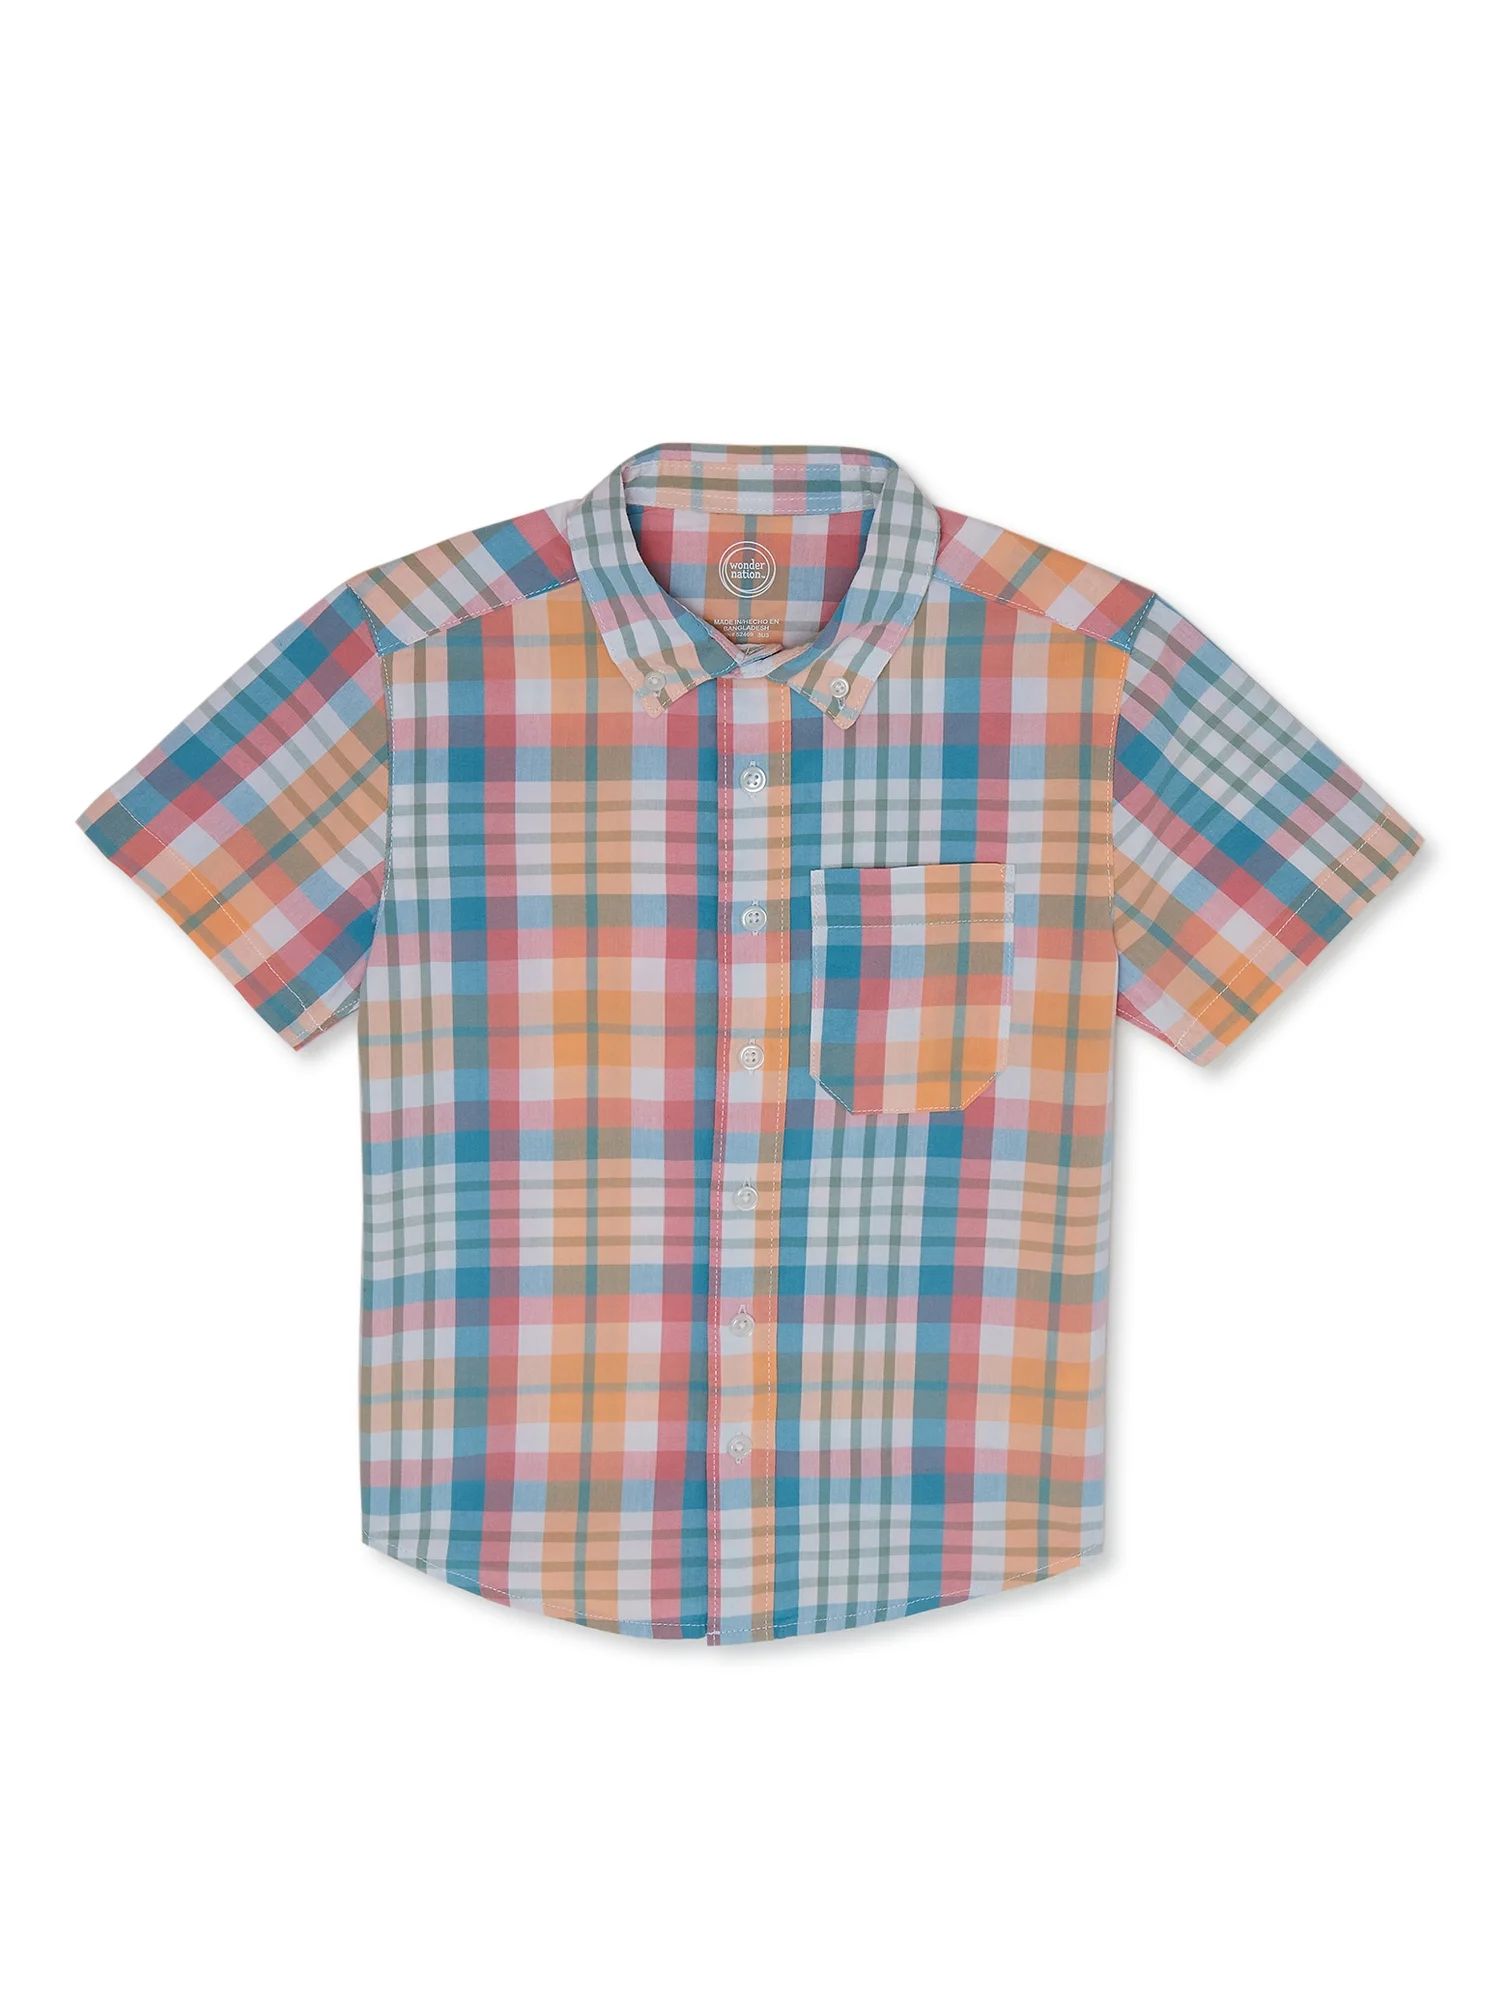 Wonder Nation Boys Woven Button Up T-Shirt with Short Sleeves, Sizes 4-12 & Husky | Walmart (US)